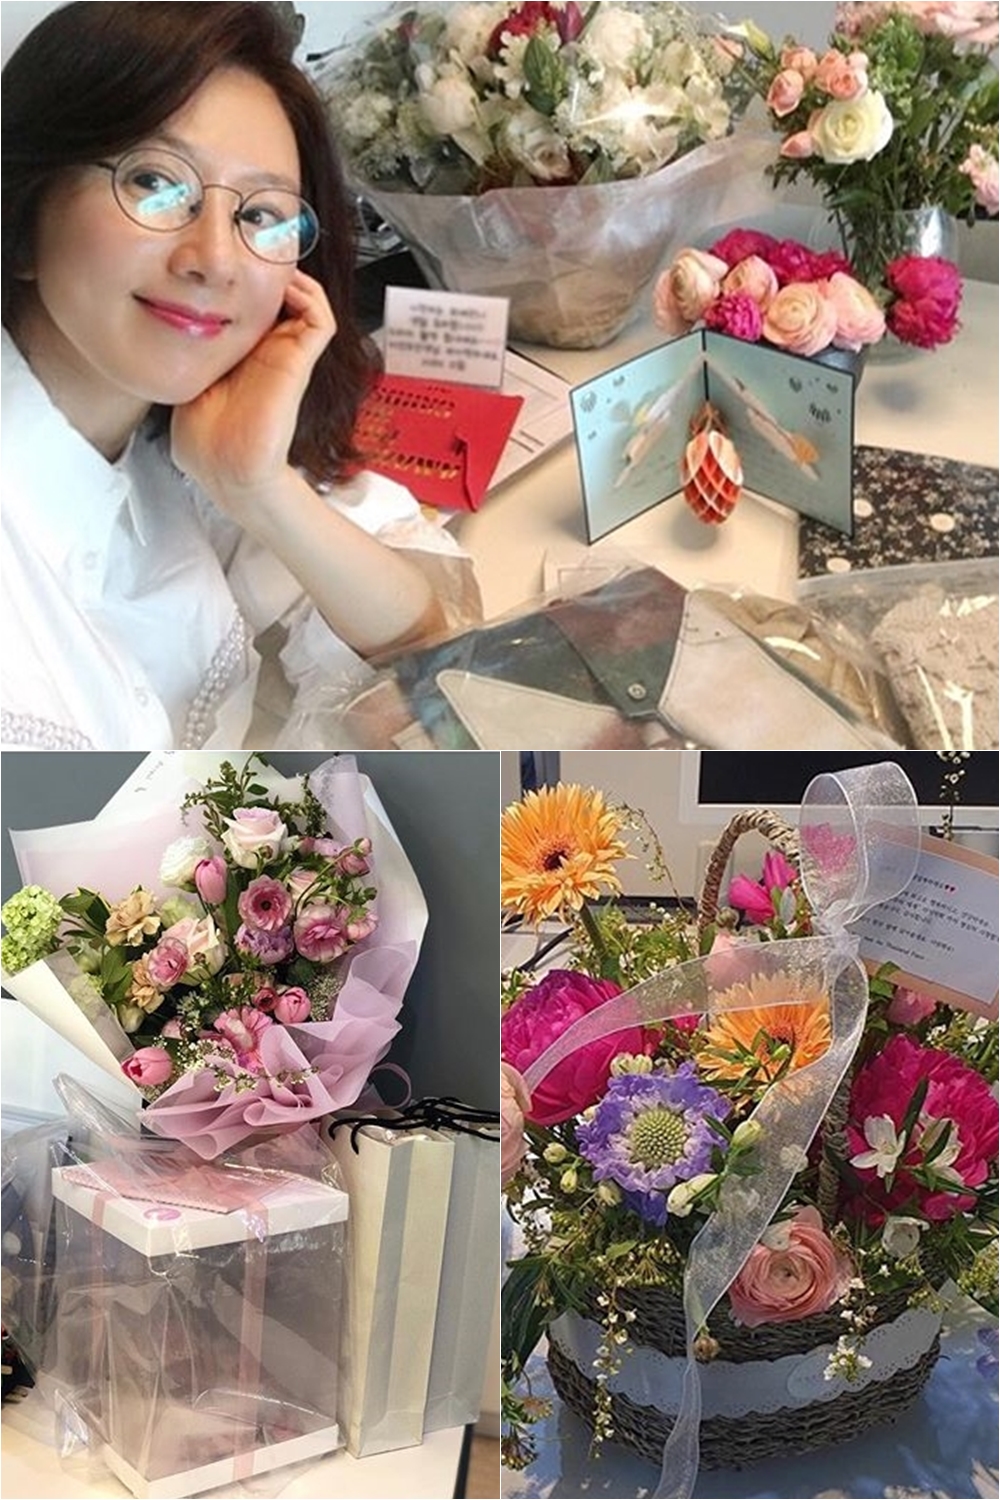 Reversal Story Smile by Ji Seon-u, The World of CouplesActor Kim Hee-ae gave thanks to the birthday Gift certification photo.Kim Hee-ae posted several photos on her Instagram page on the 27th, with an article entitled Thank you so much.The photo shows Kim Hee-ae posing with a cake that seemed to be received on his birthday Gift.In another photo, a celebratory bouquet filled with tables and cards attract attention: Kim Hee-ae celebrated her birthday on the 23rd.On the other hand, Kim Hee-ae is currently in charge of the main character Ji Sun-woo in the JTBC gilt drama The World of Couples, which is currently popular.